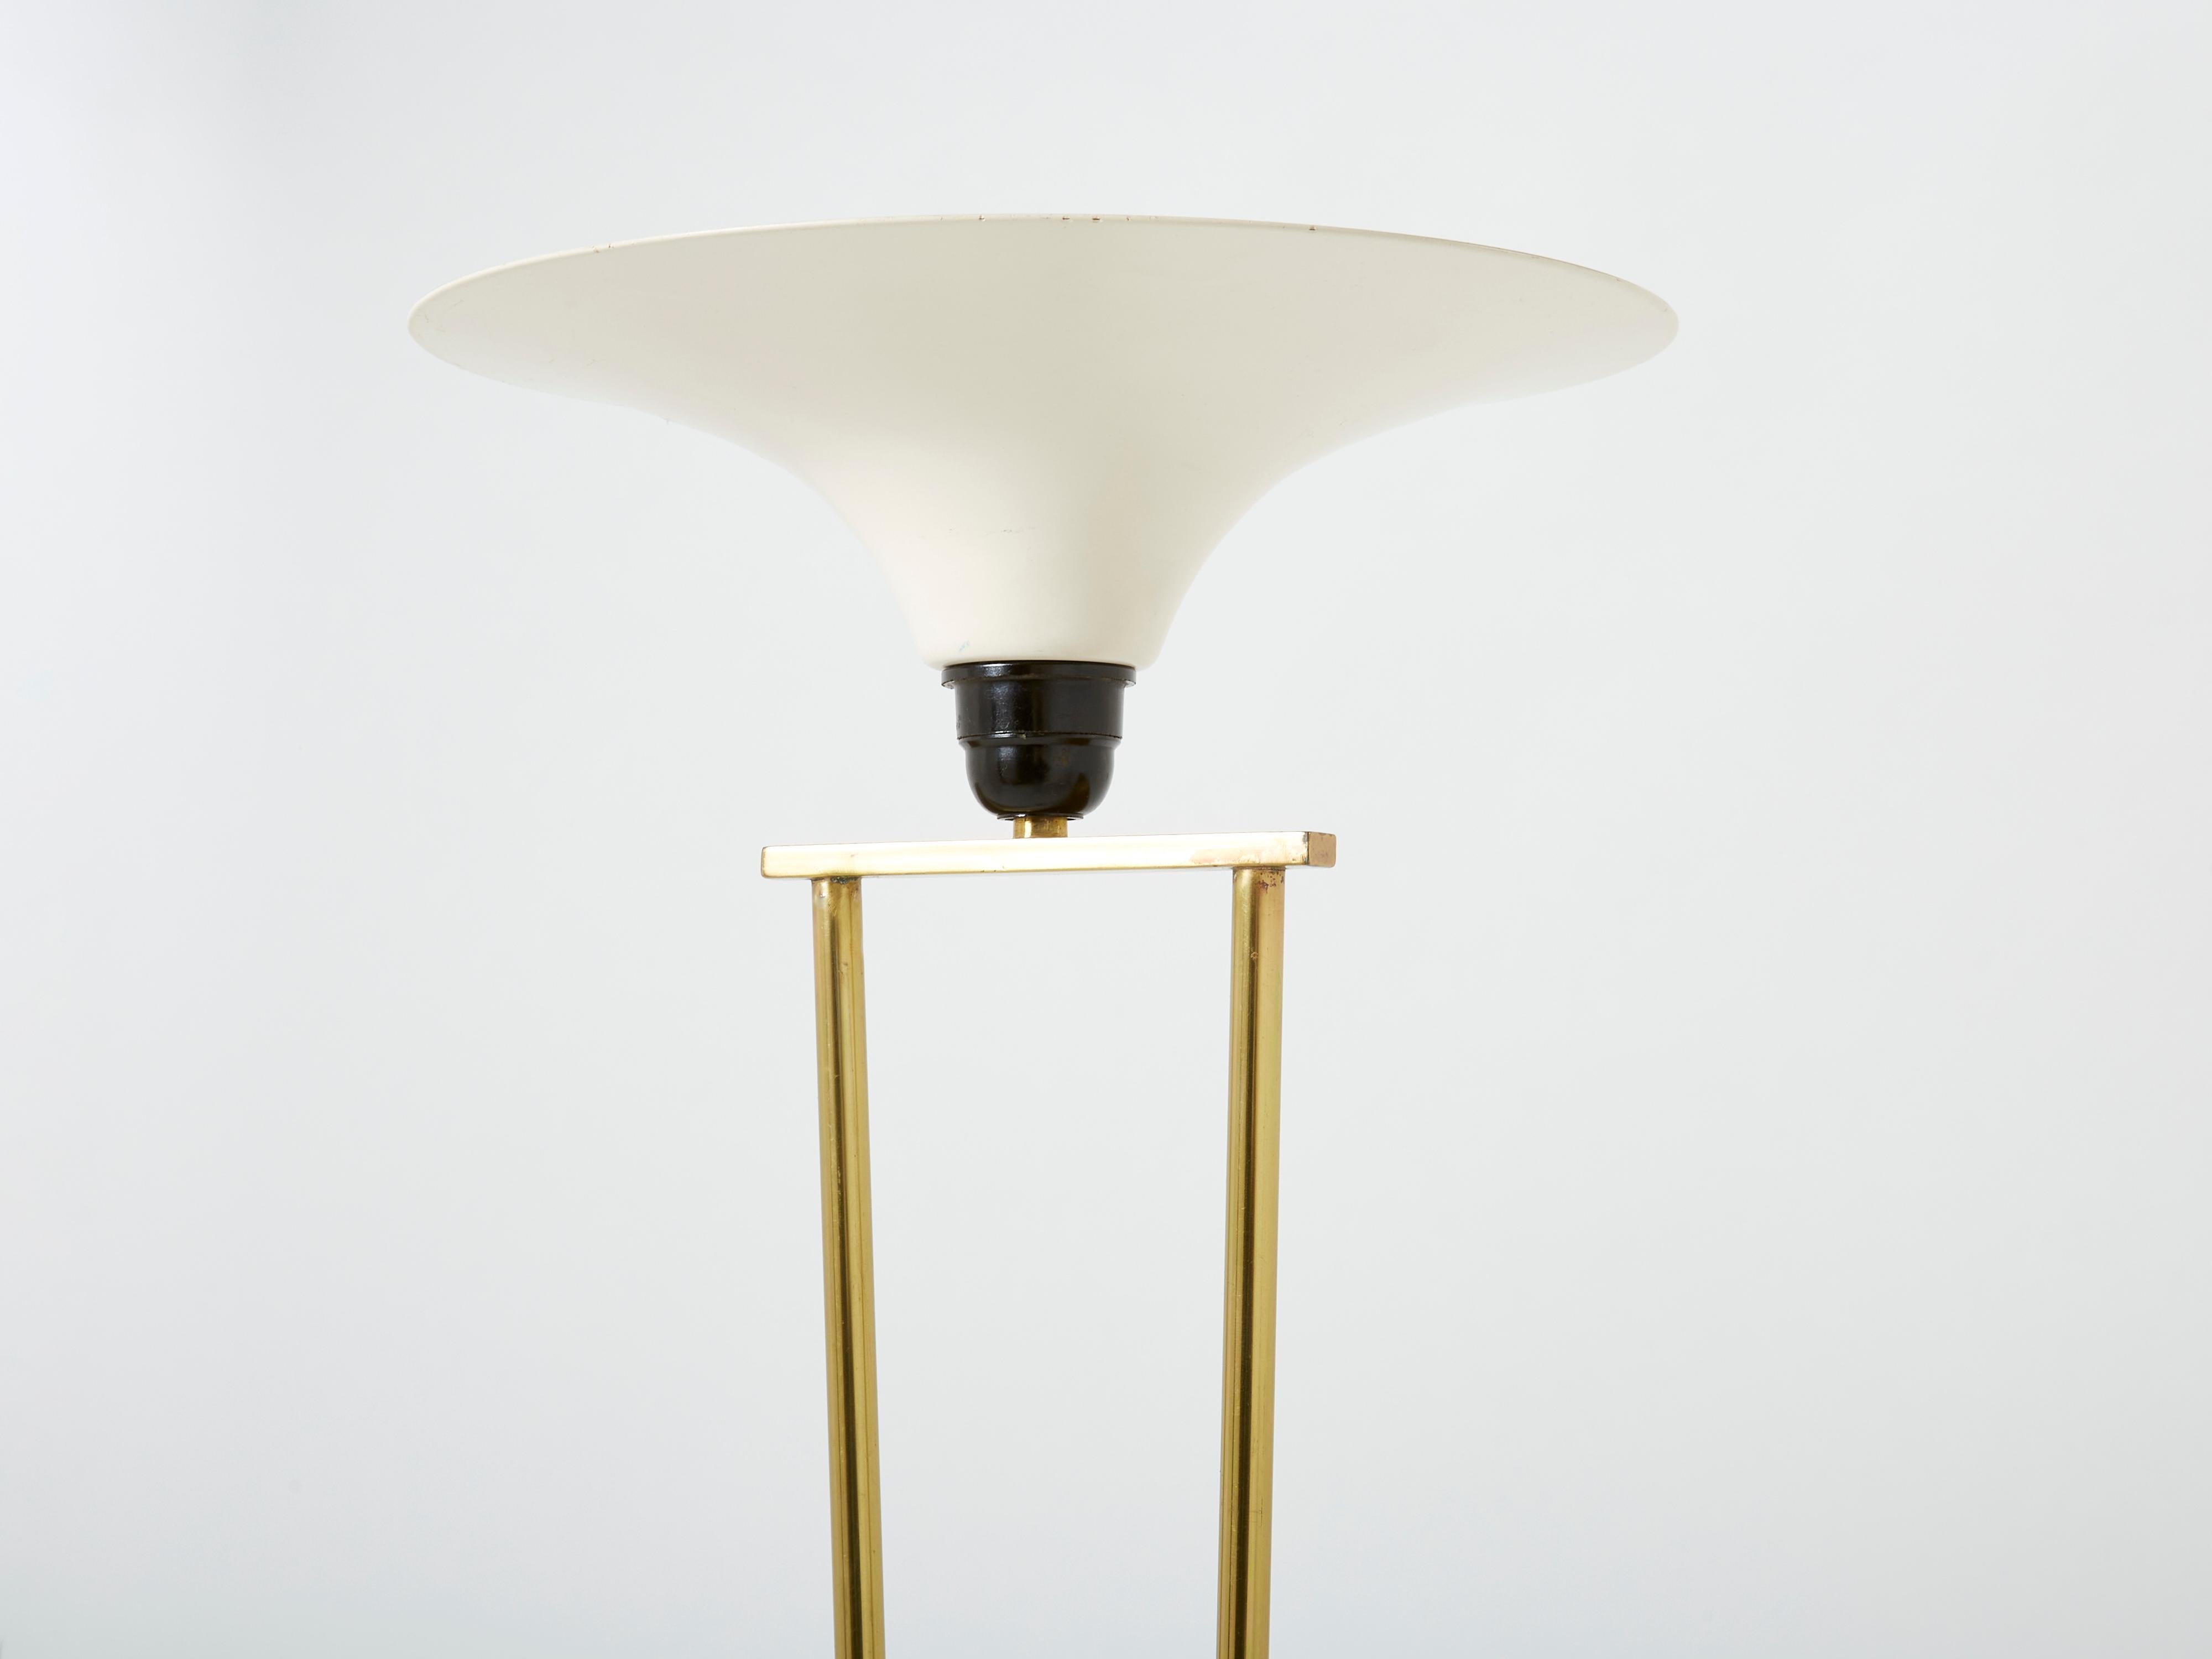 Tall brass legs curve gently into the gorgeous marble base of this Italian midcentury 1960s floor lamp. The lamp covering is made of a milky opaline and has a chic, fluted shape. The overall effect is instantly charming. The lamp has been fully